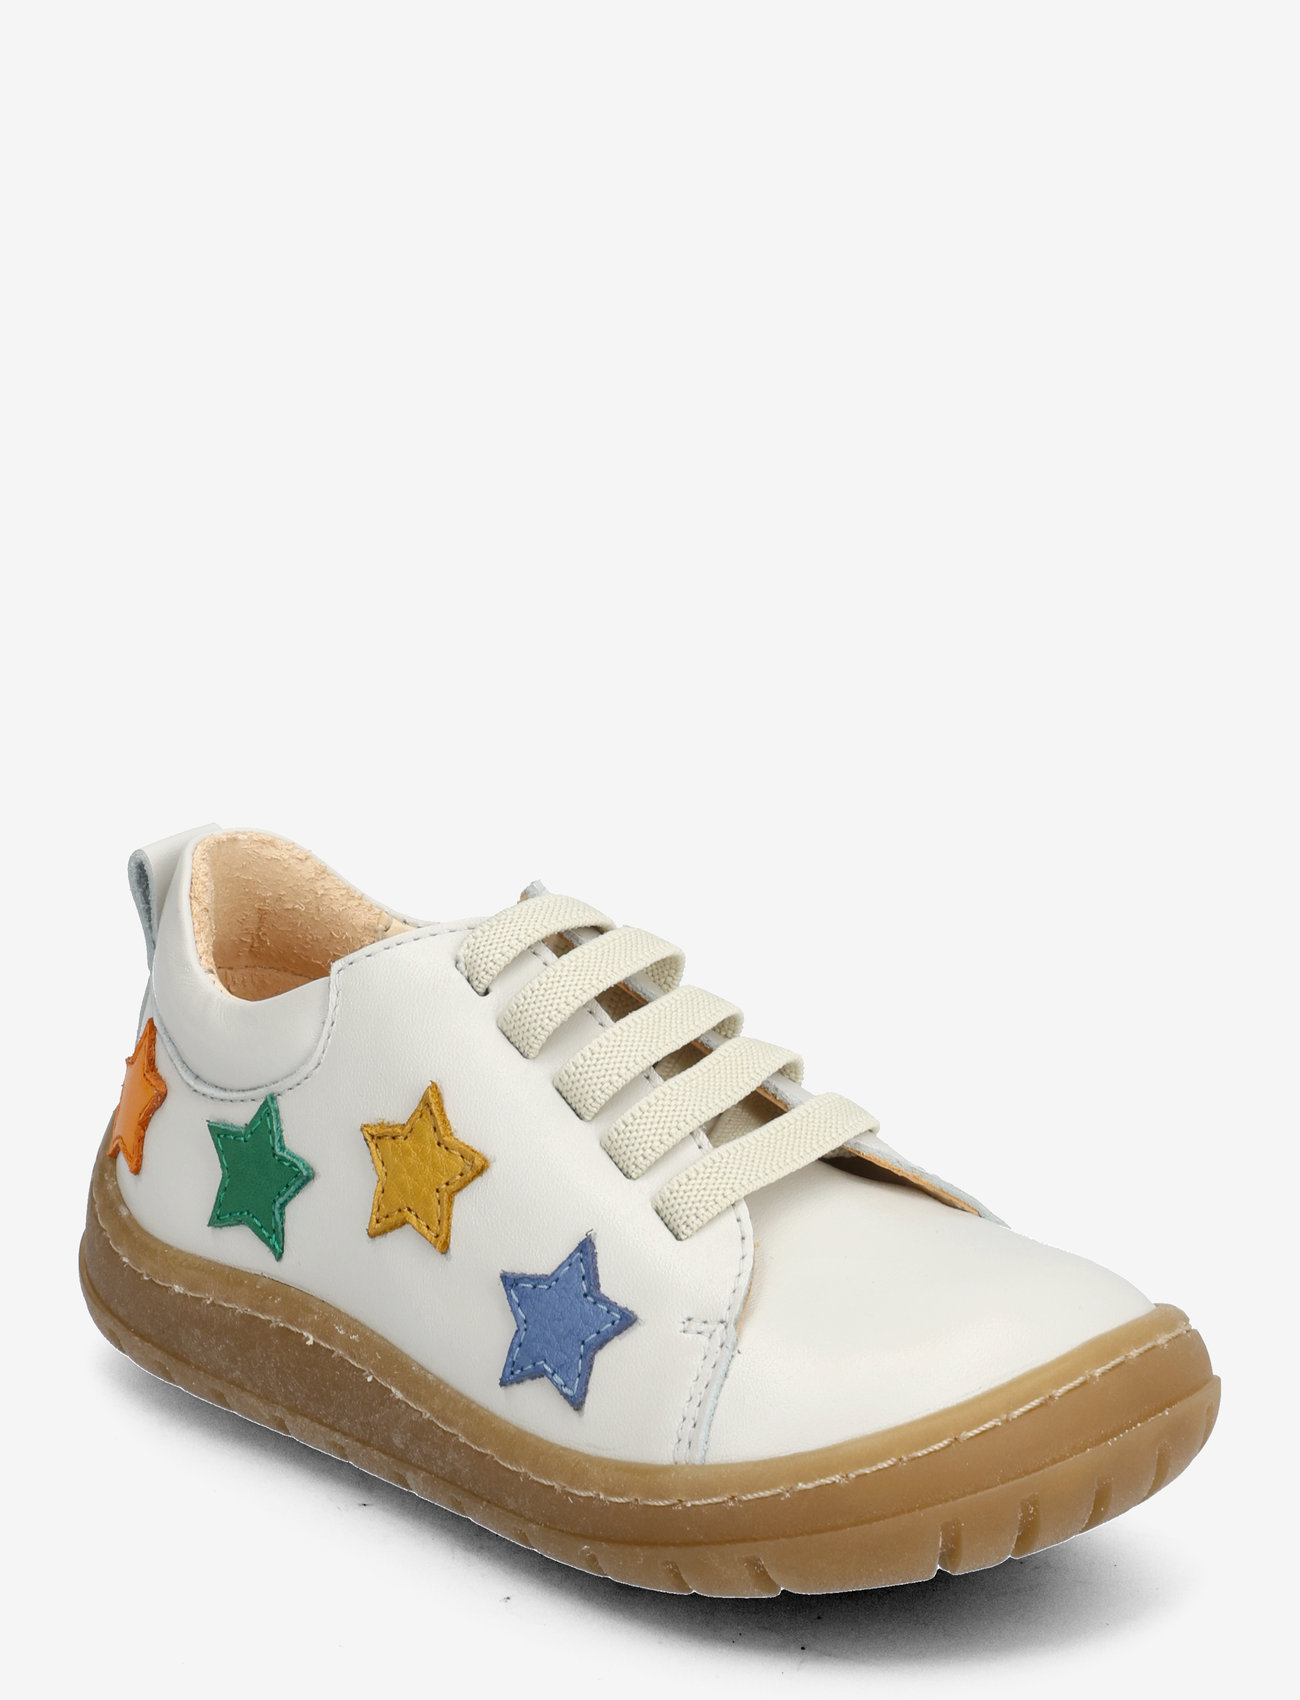 ANGULUS - Shoes - flat - with lace - sommerkupp - 1493/a006 off white/stars - 0